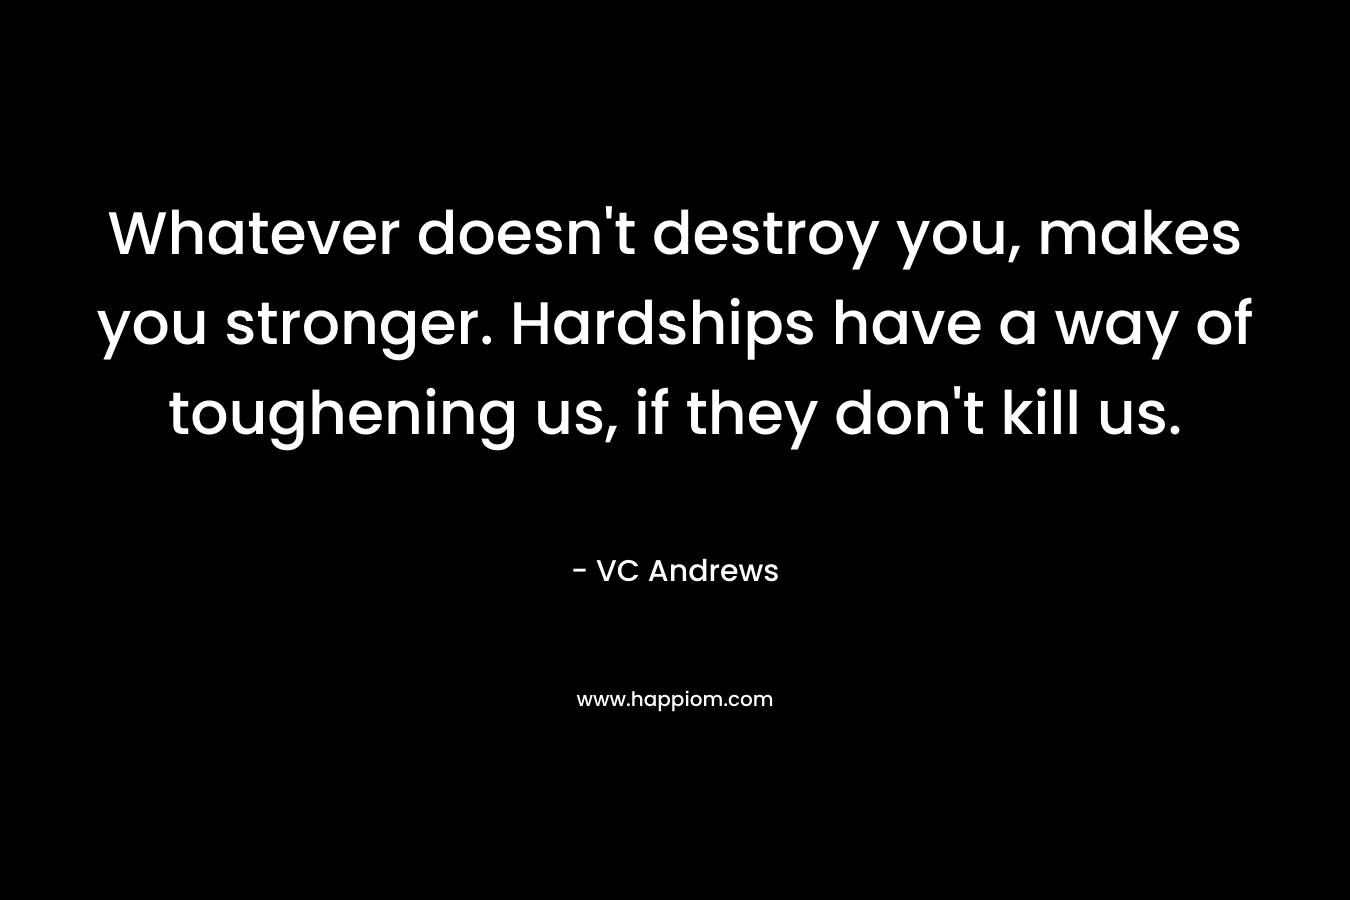 Whatever doesn't destroy you, makes you stronger. Hardships have a way of toughening us, if they don't kill us.